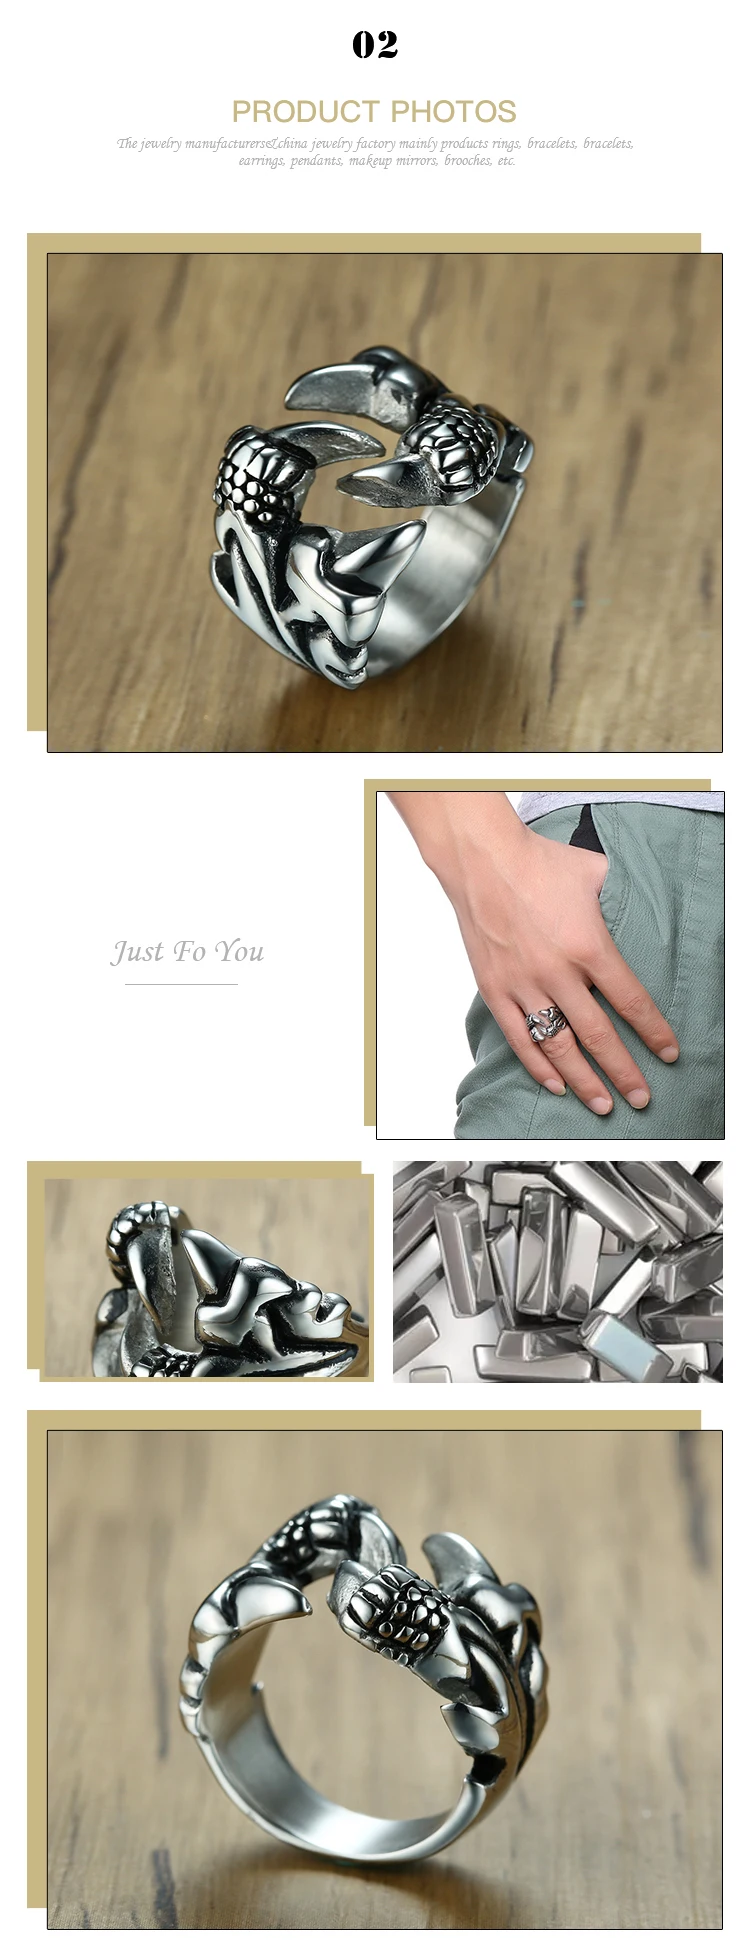 New Product Wholesale 12MM Vintage Dragon Claw Ring Stainless Steel Claw Casting Men's Ring RC-391